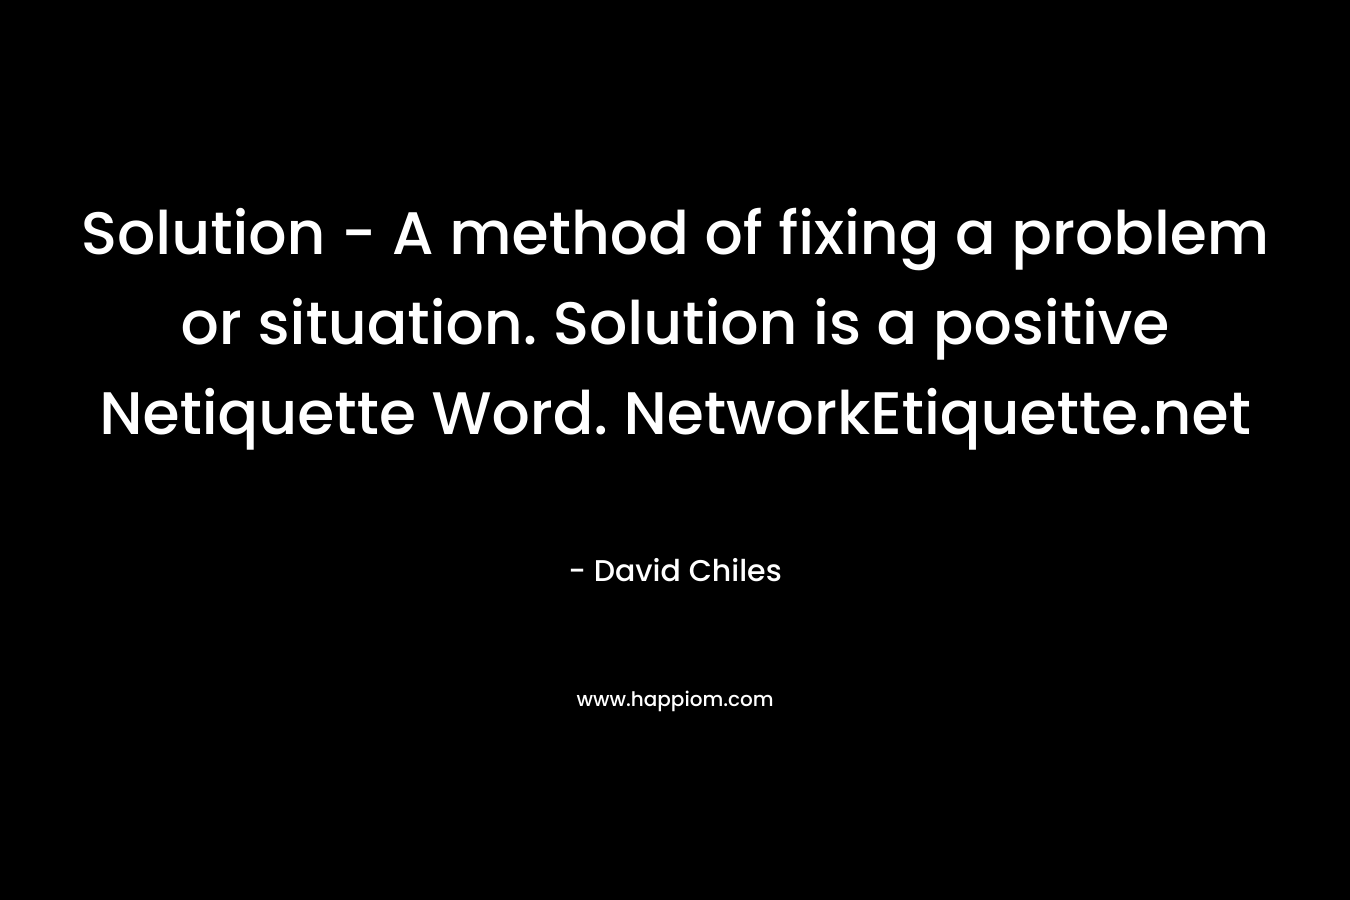 Solution - A method of fixing a problem or situation. Solution is a positive Netiquette Word. NetworkEtiquette.net